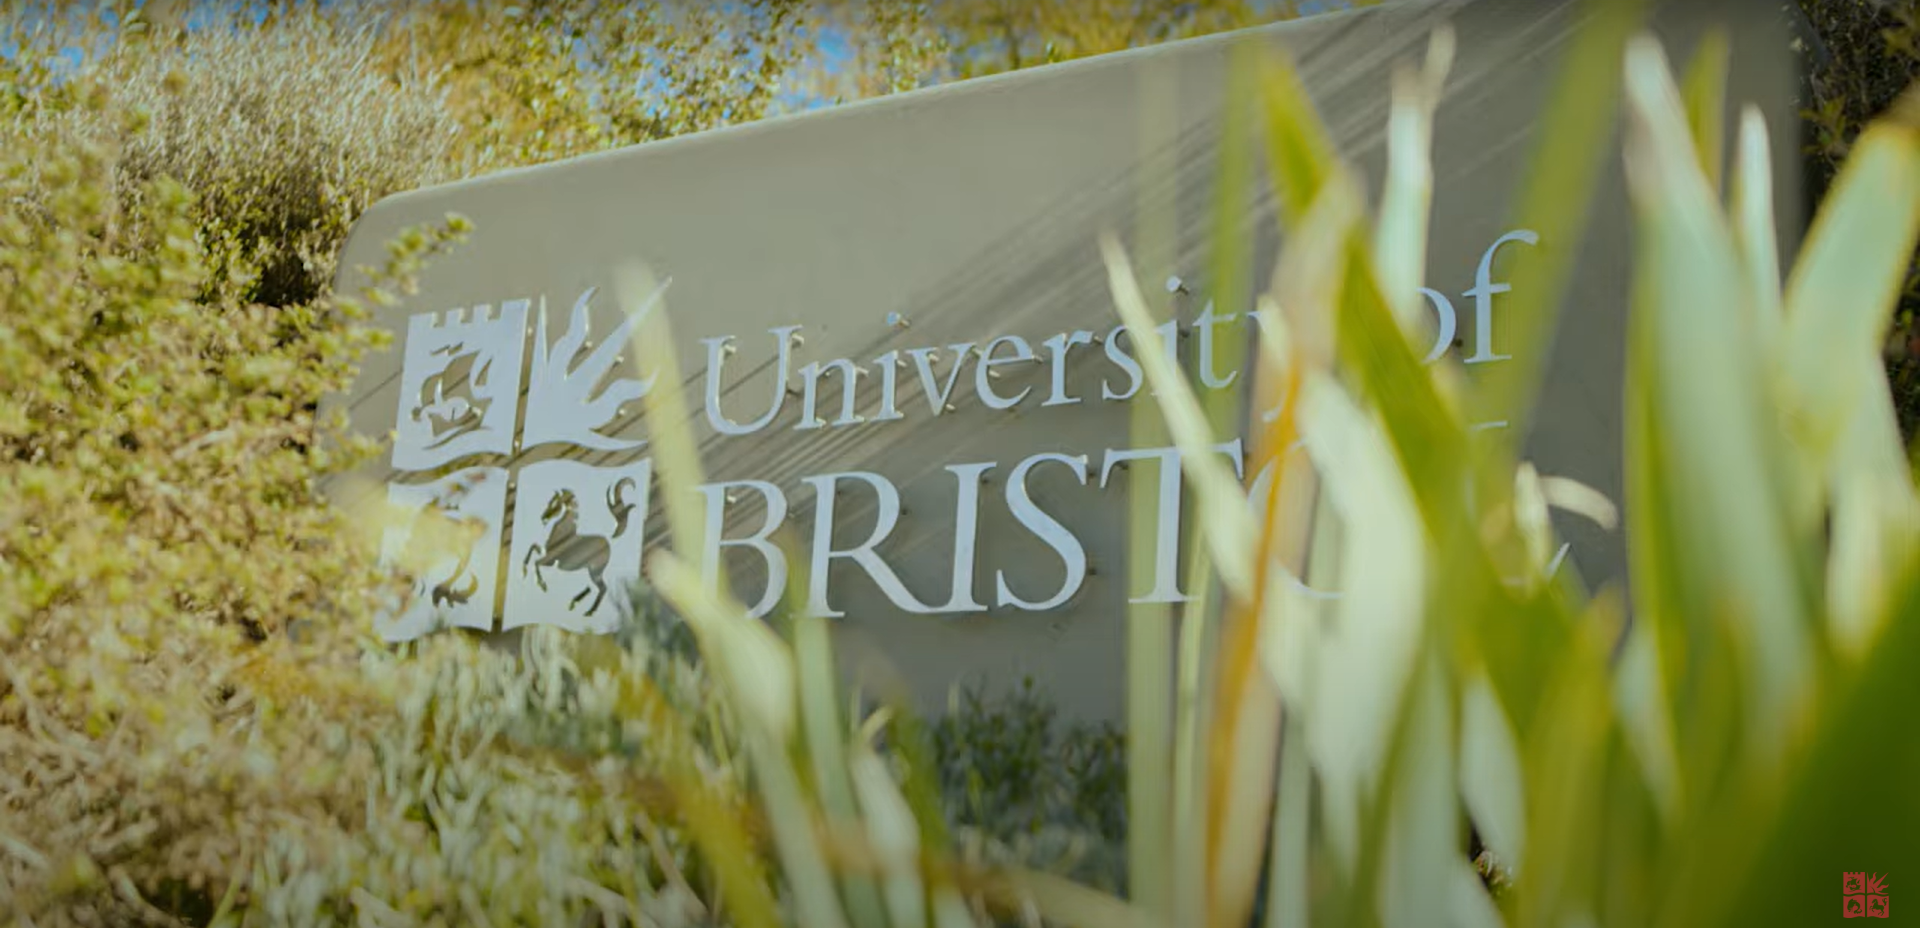 Study abroad at one of the best universities in the UK